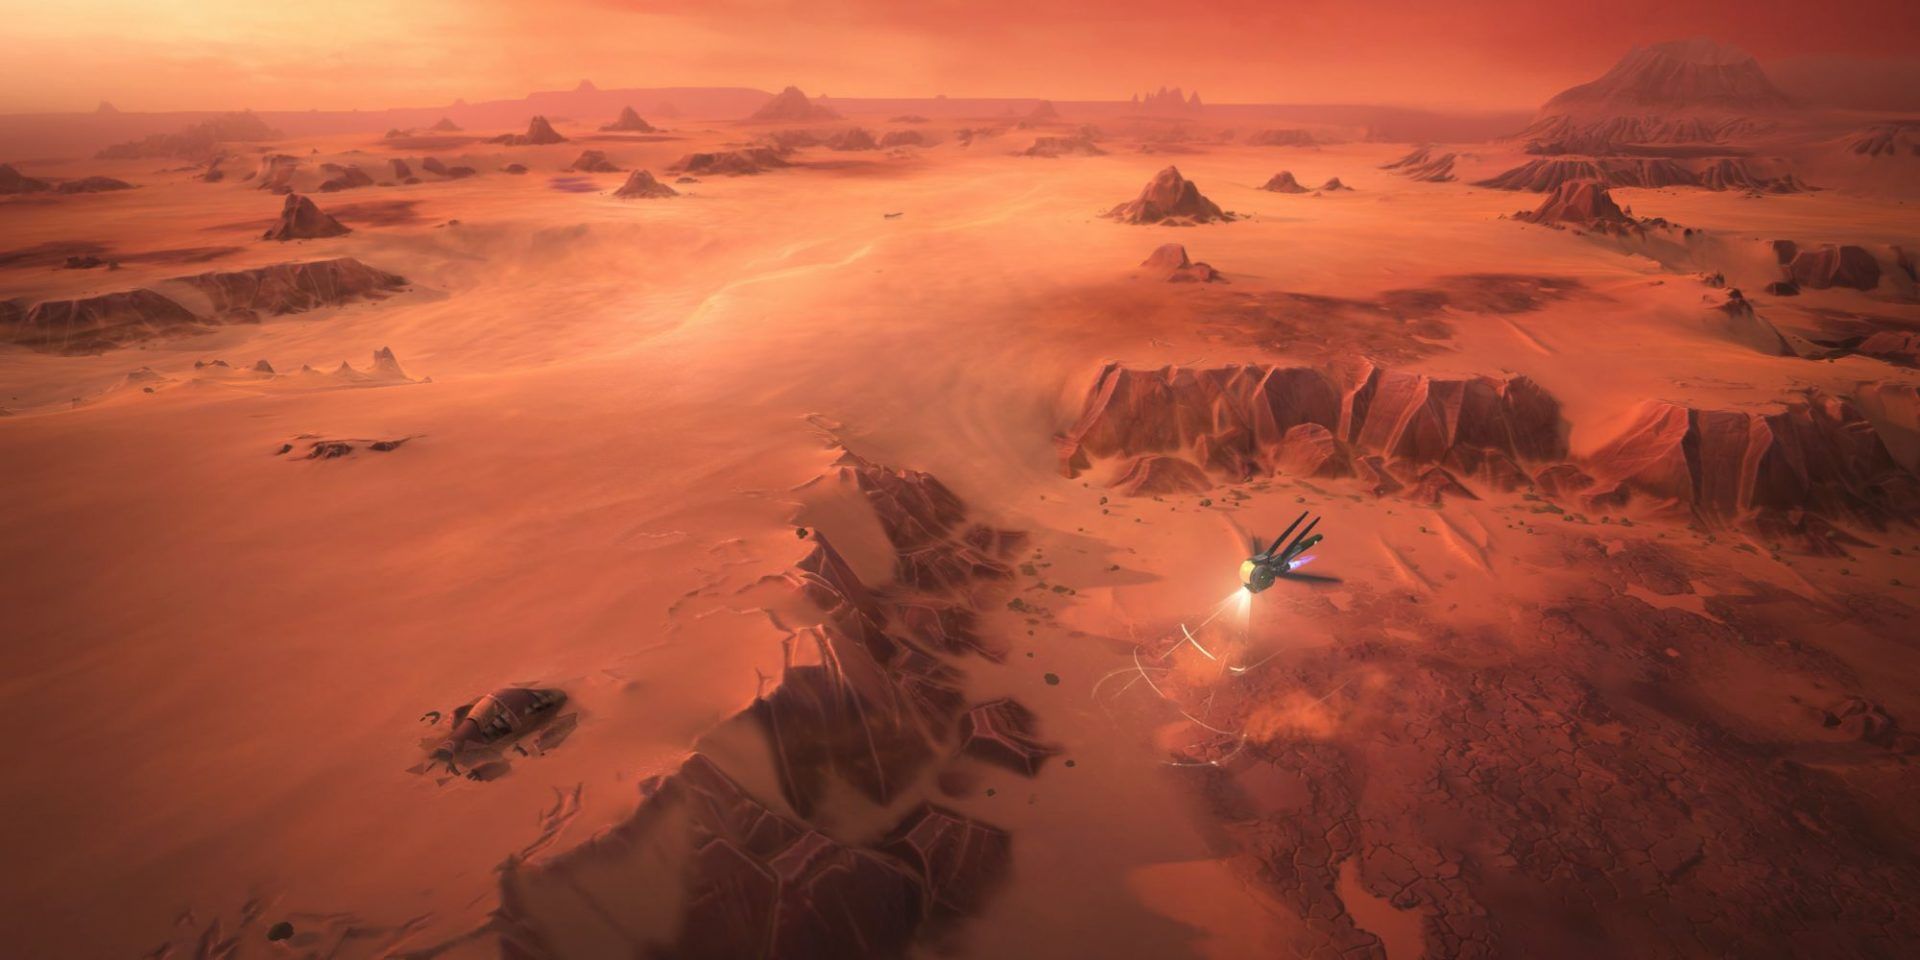 A view of Arrakis from Dune: Spice Wars